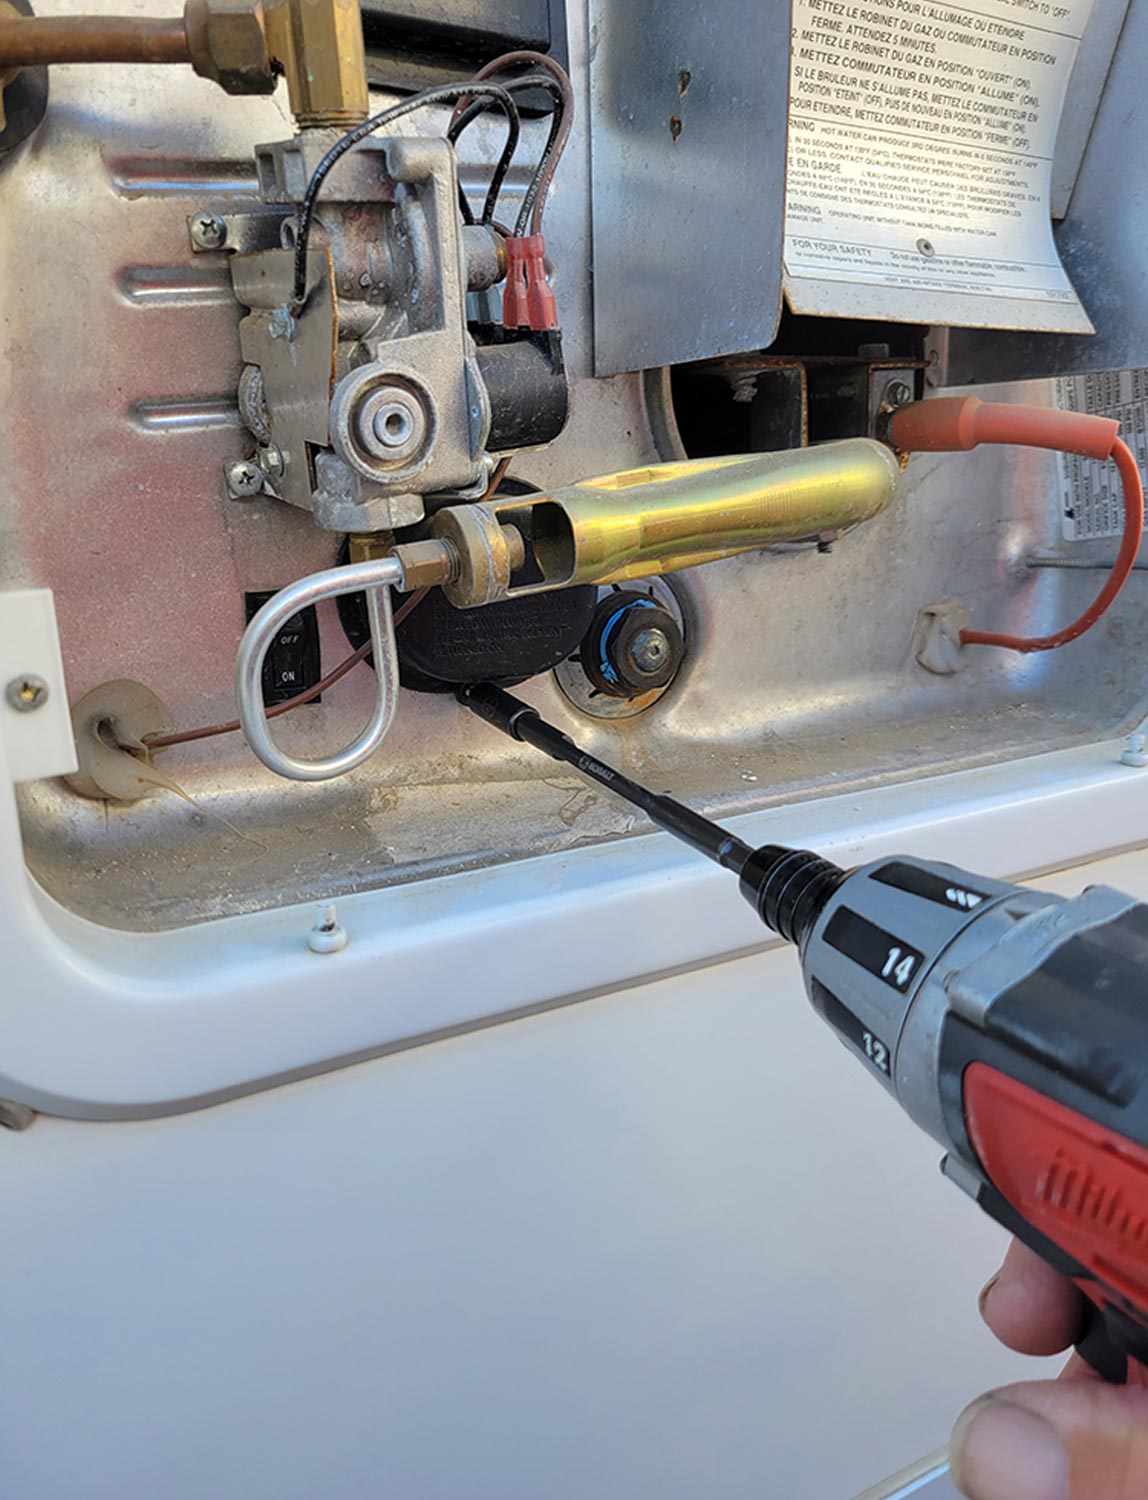 a drill gun is used to remove a screw from the heating element cover